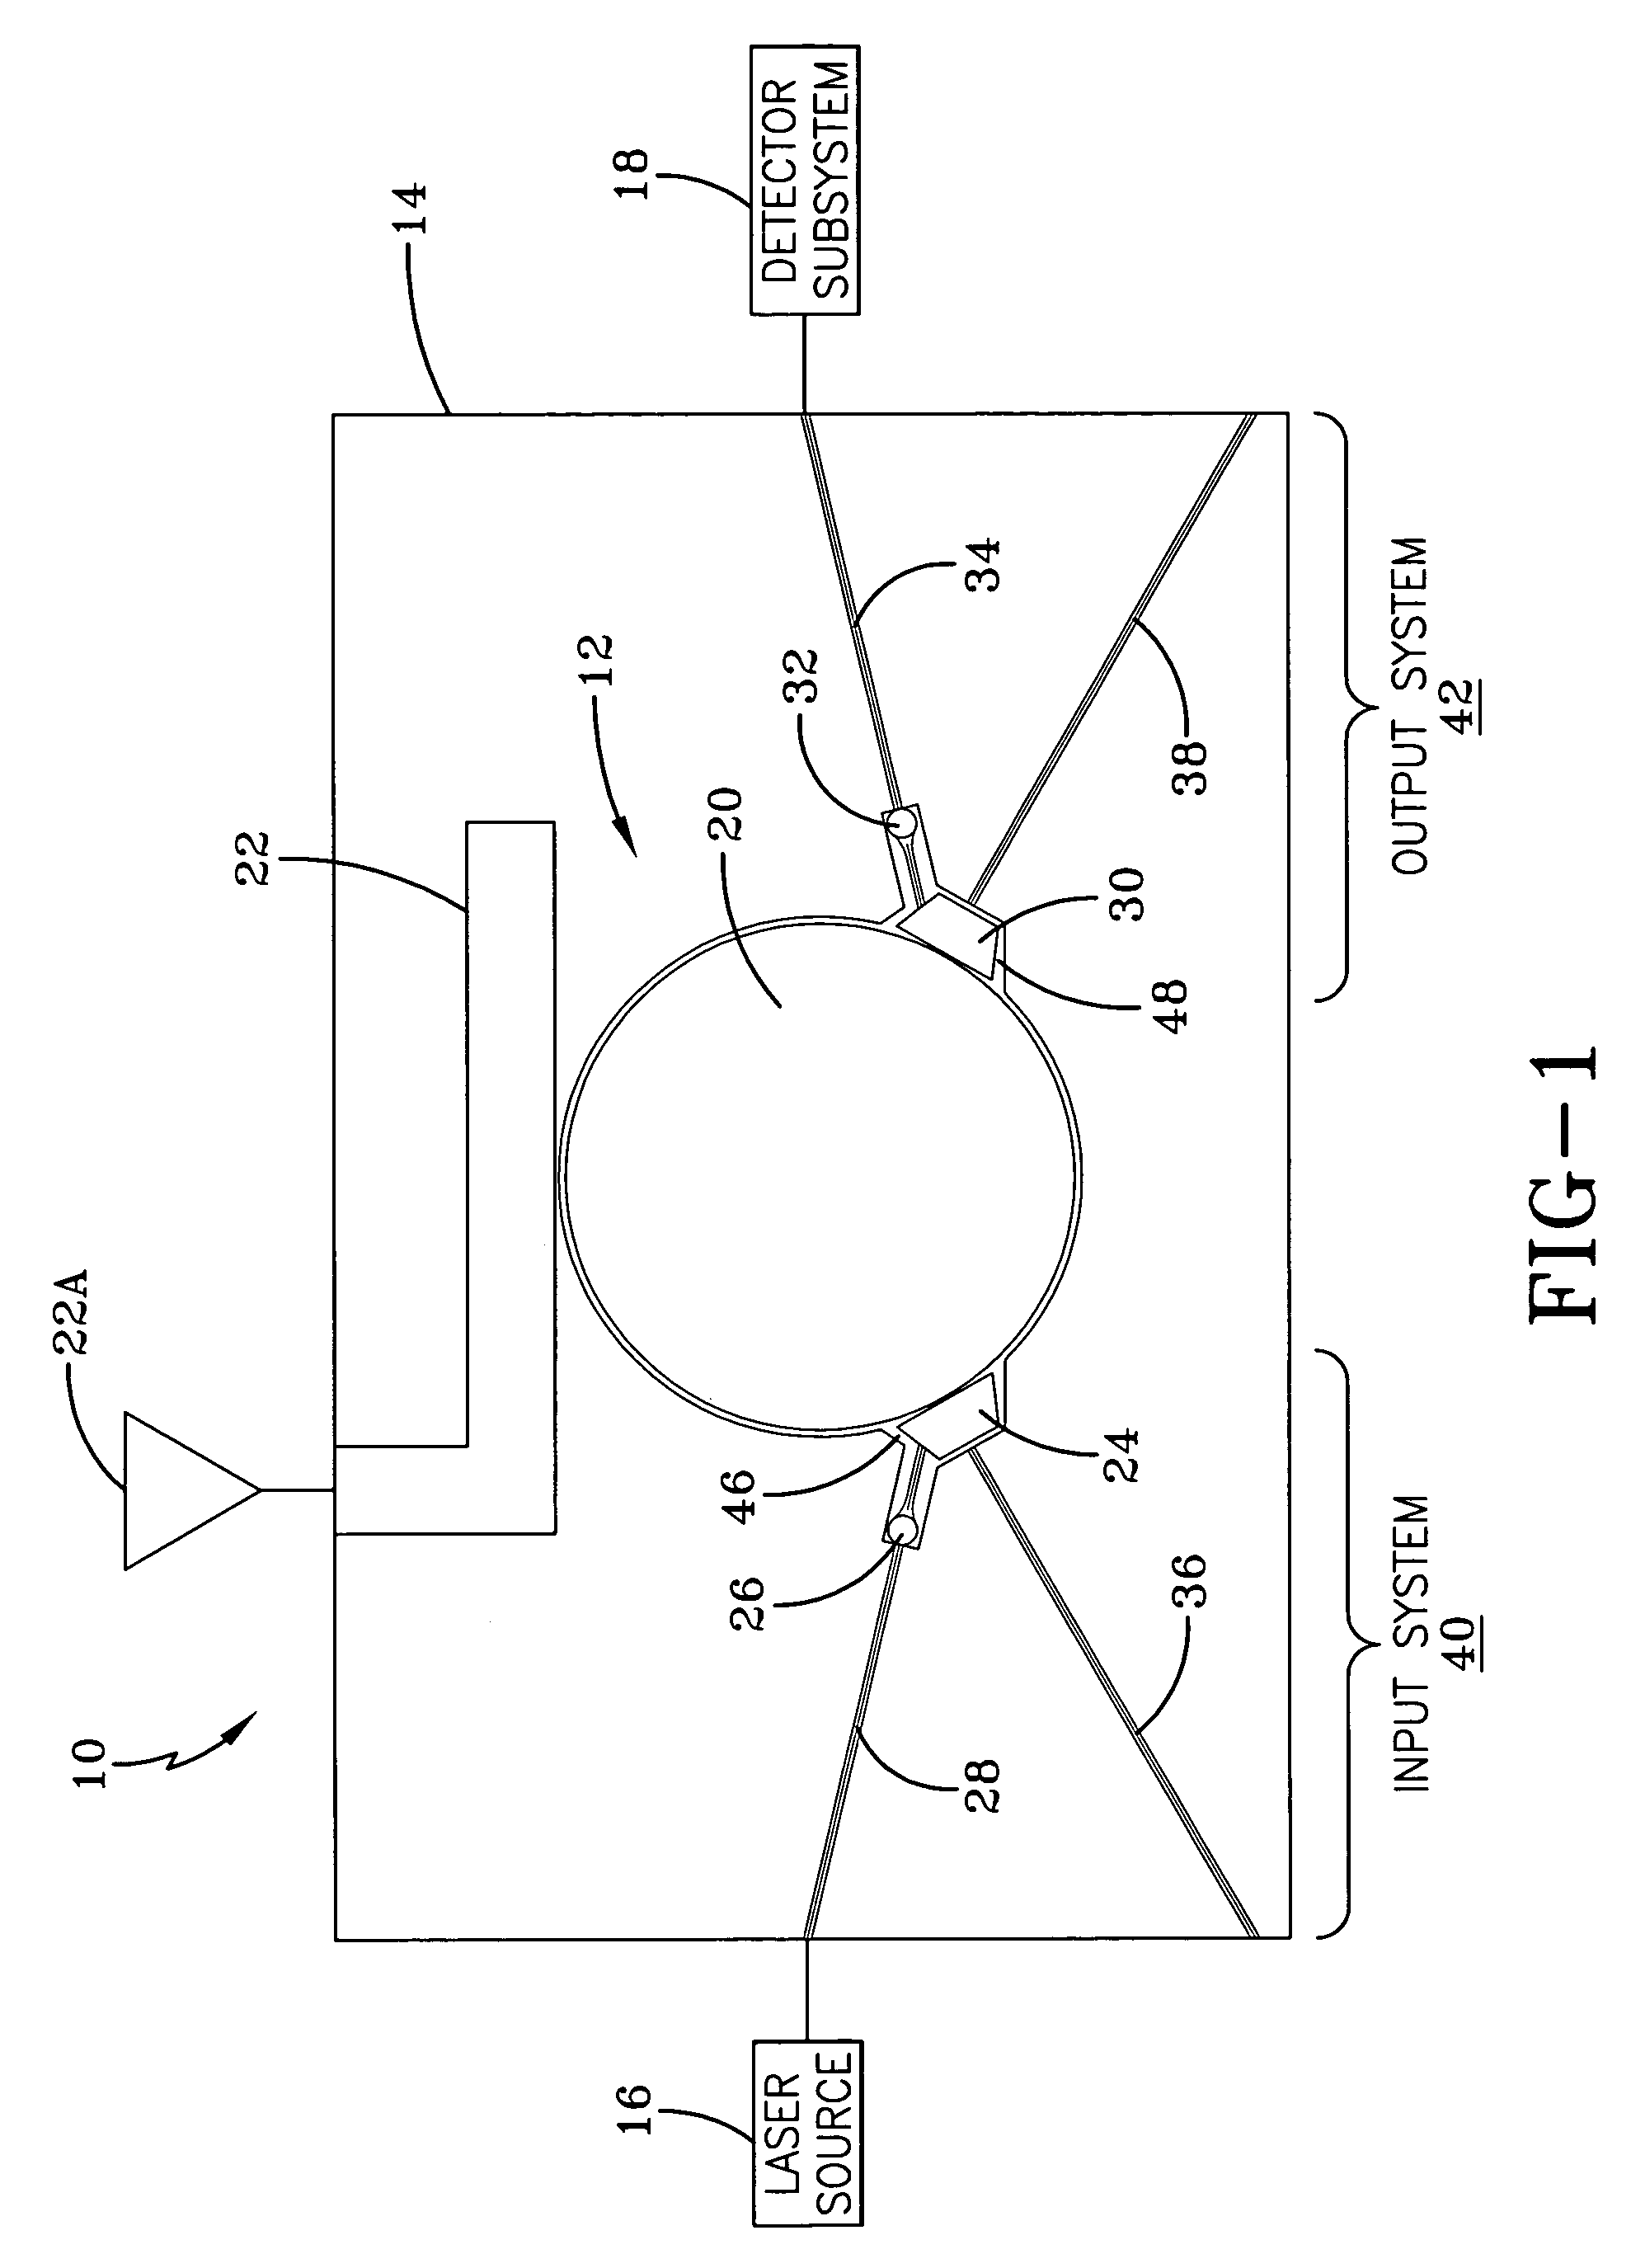 Apparatus and method for packaging and integrating microphotonic devices